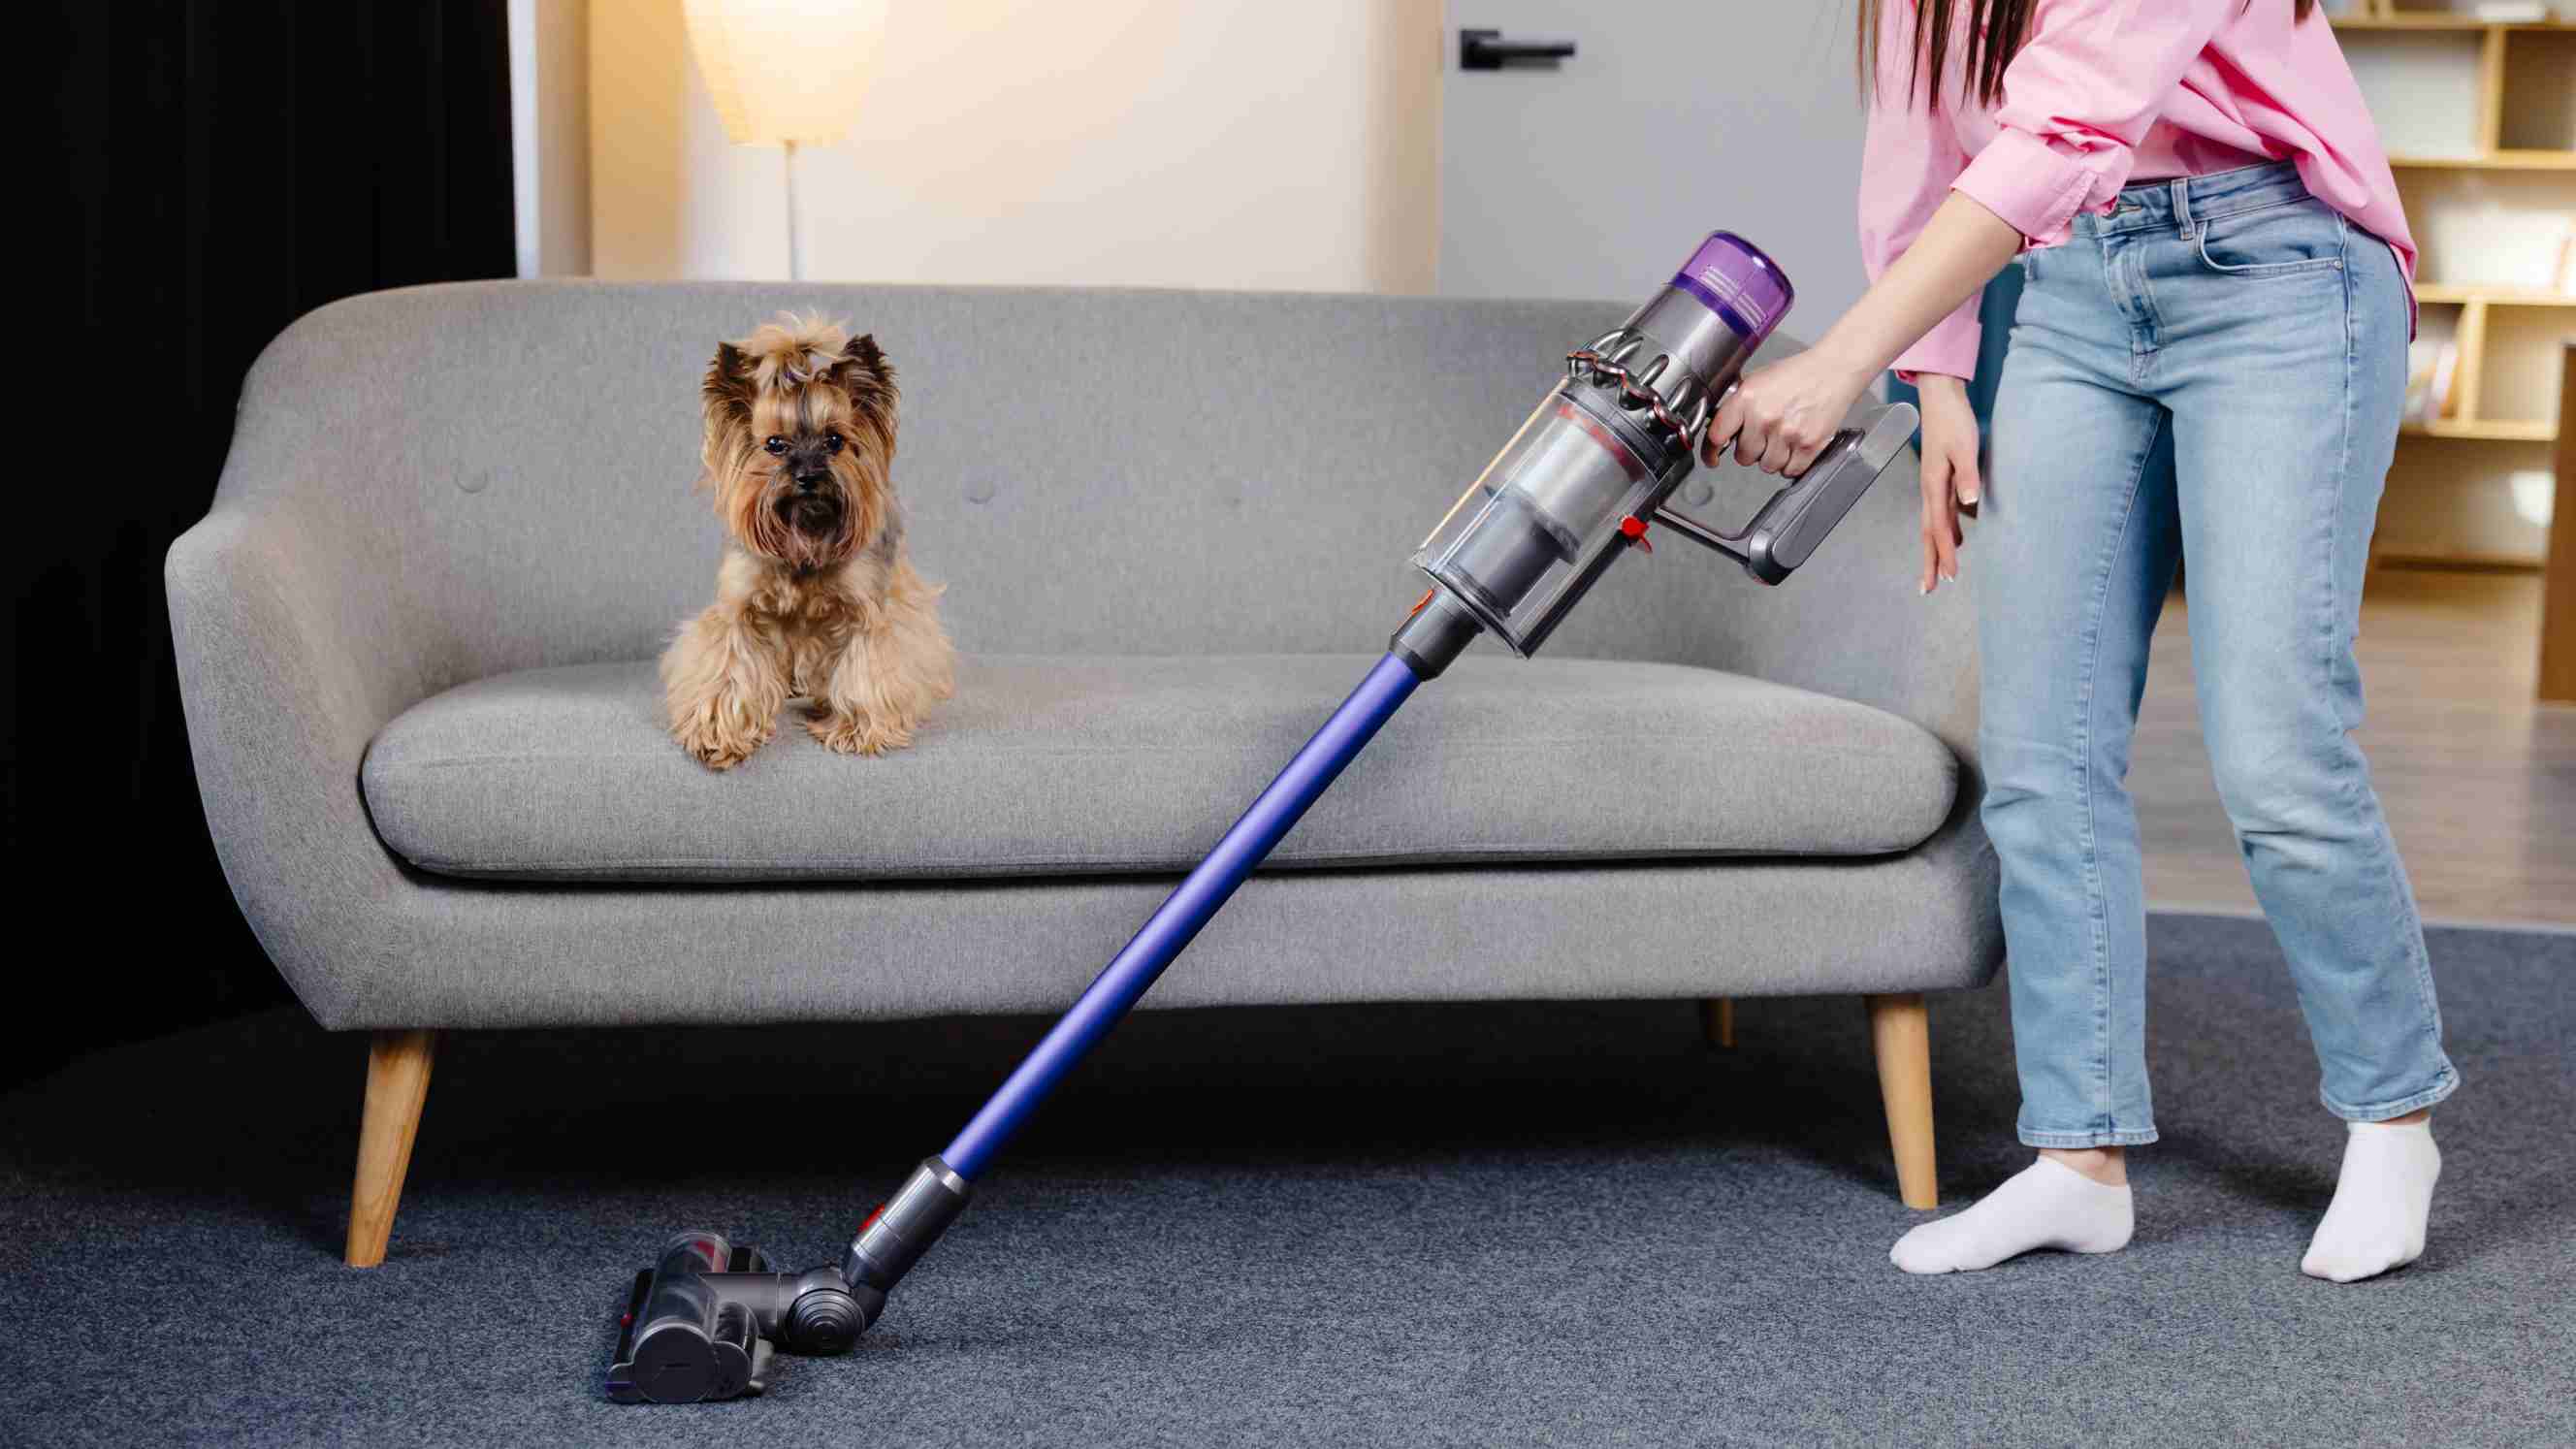 Bagged vs. bagless vacuum - A woman vacuuming at home with a bagged vacuum cleaner while her cute dog watches